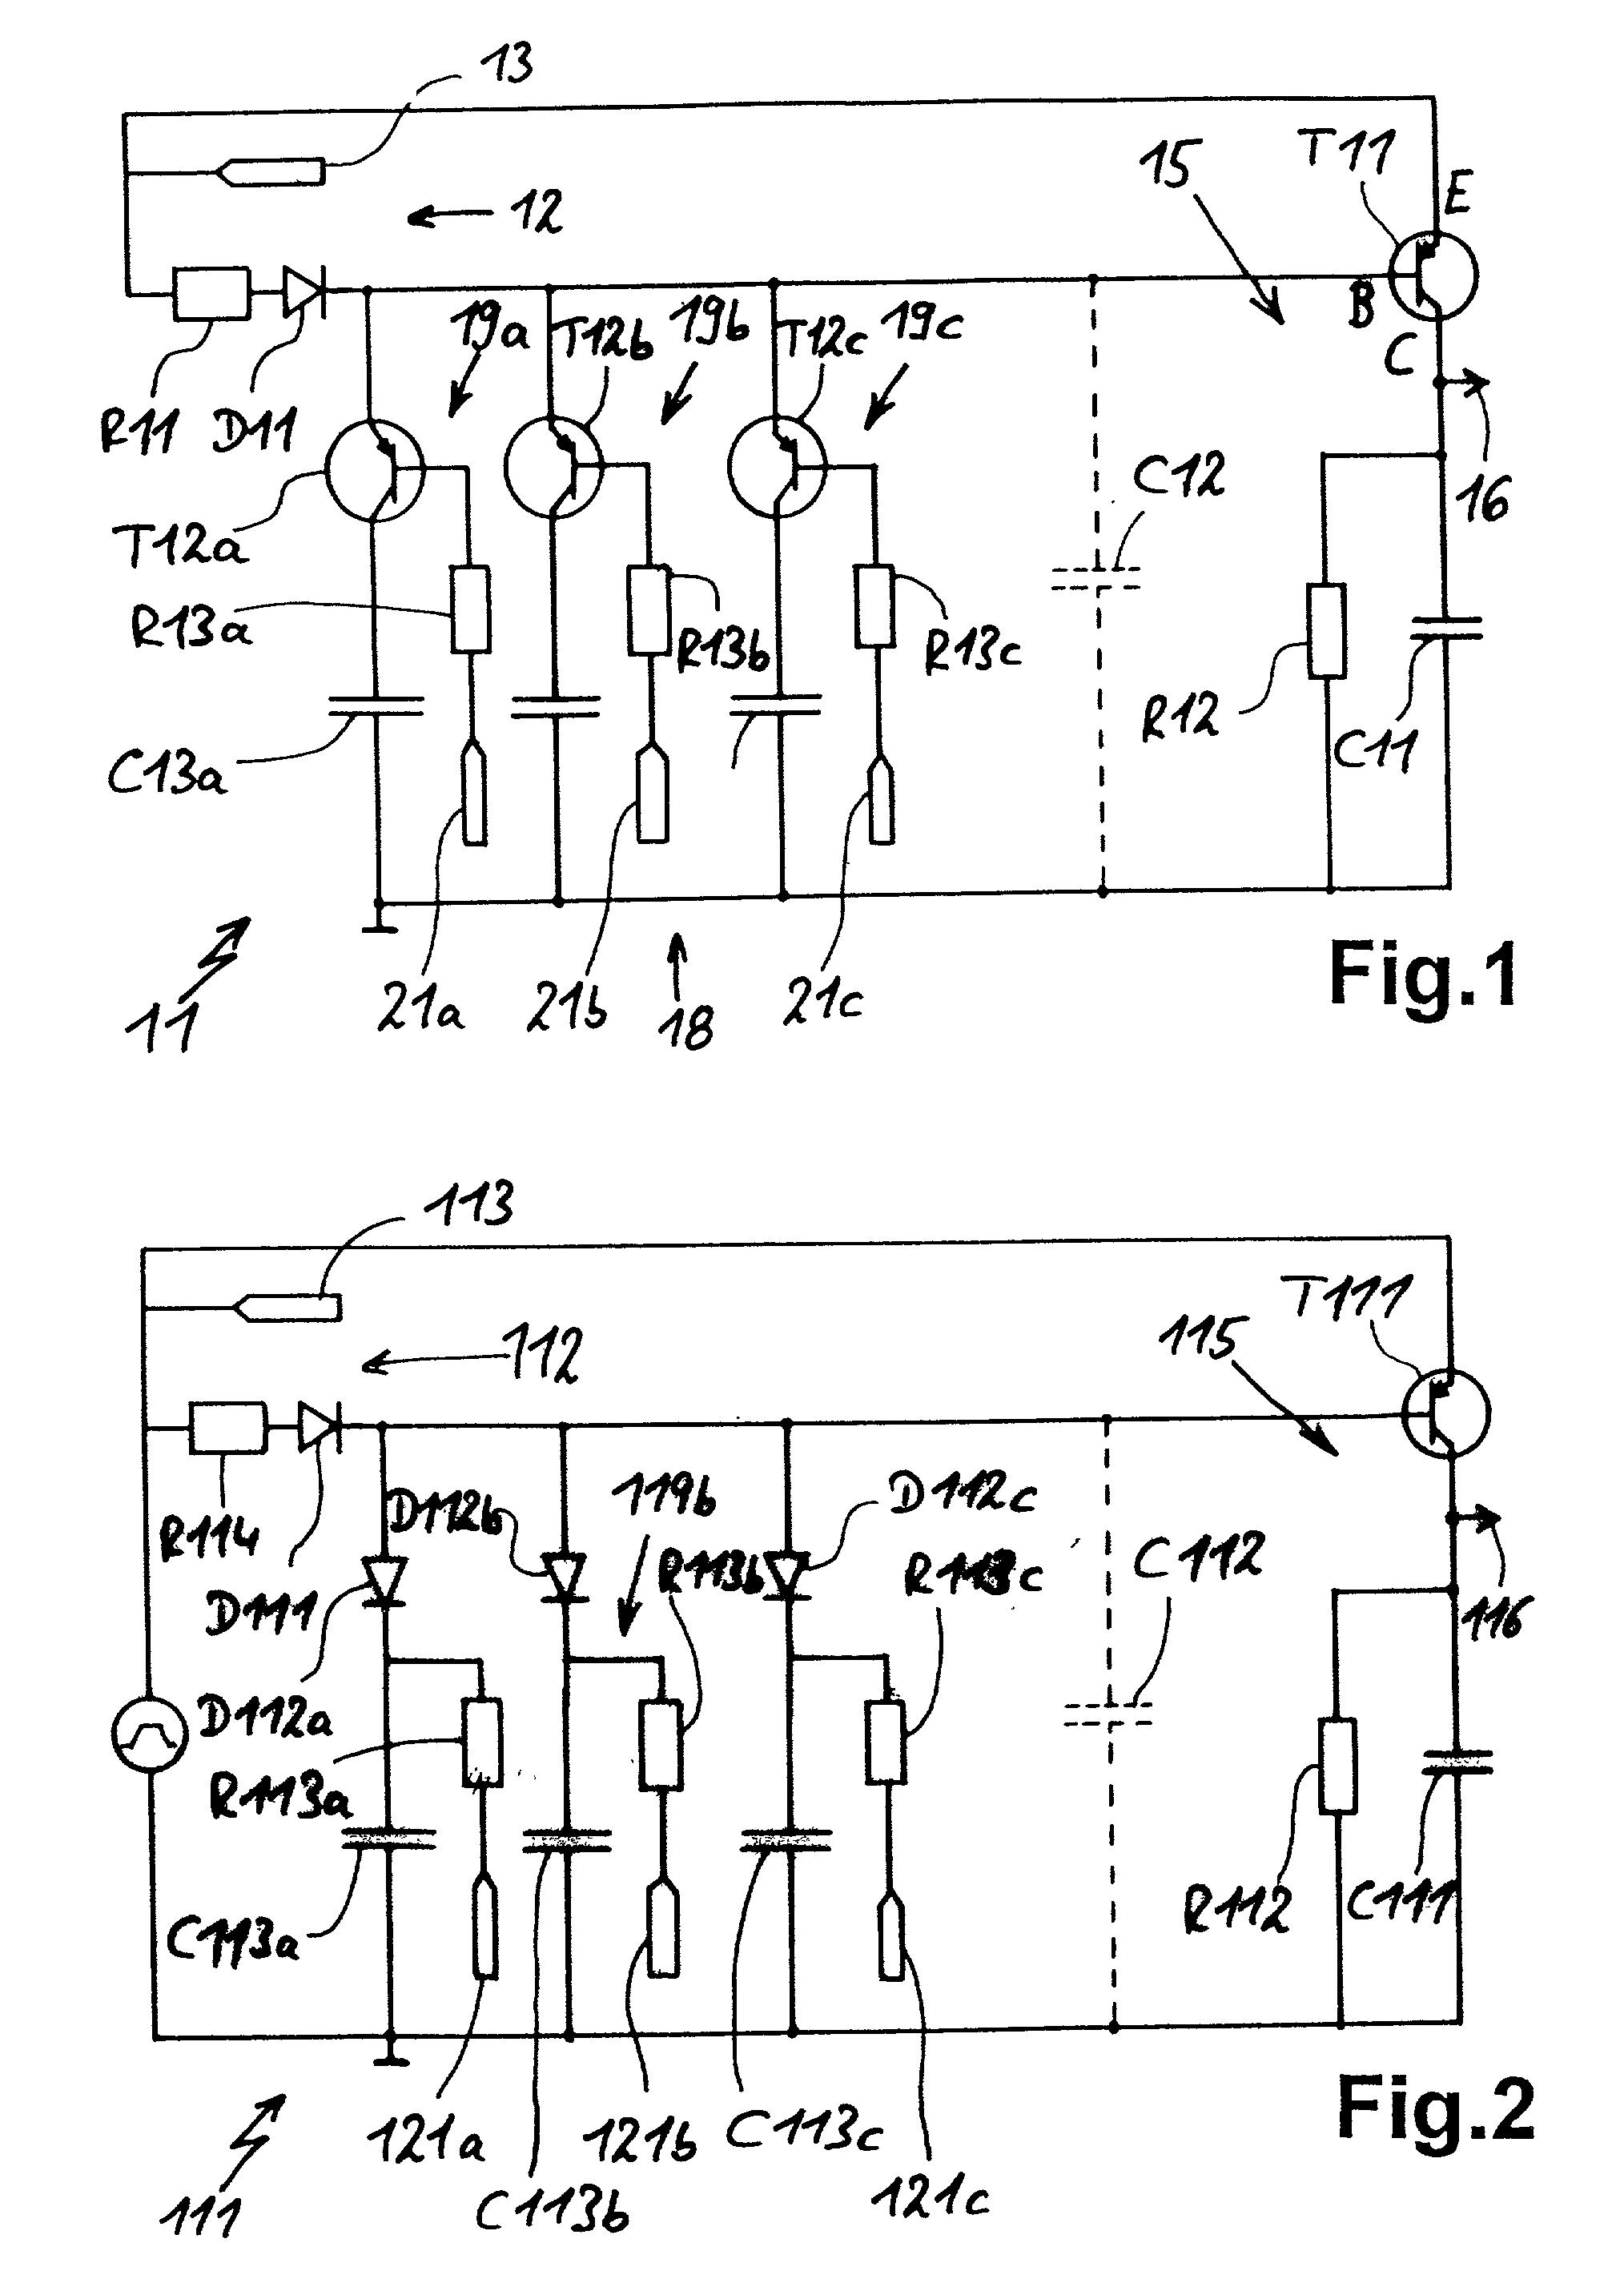 Circuit layout for several sensor elements